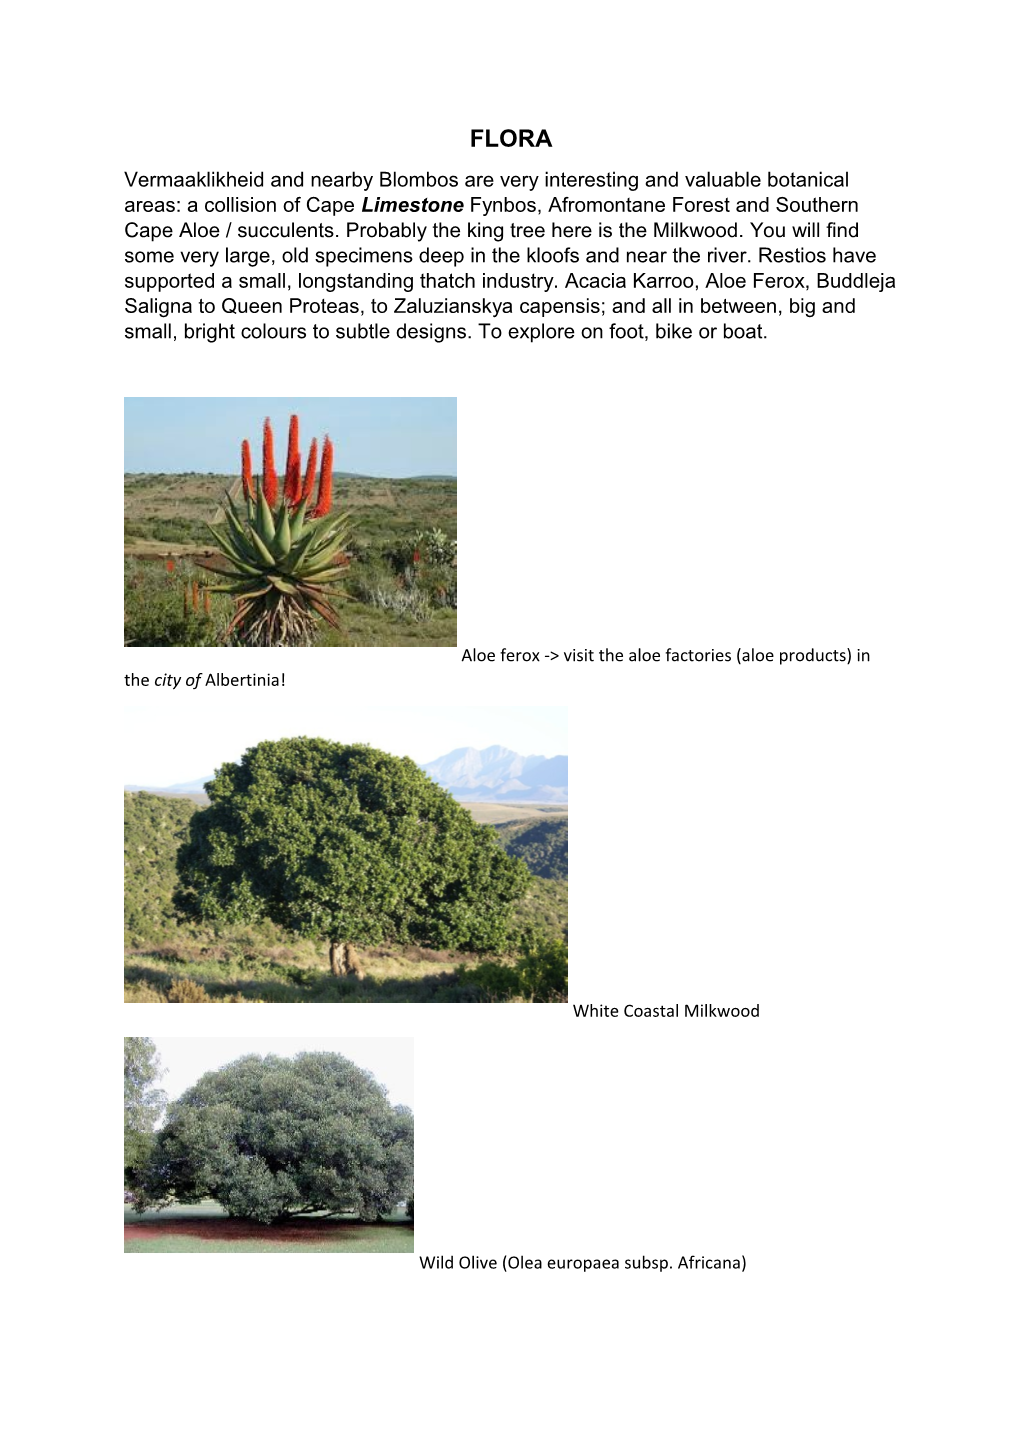 Vermaaklikheid and Nearby Blombos Are Very Interesting and Valuable Botanical Areas: Acollision